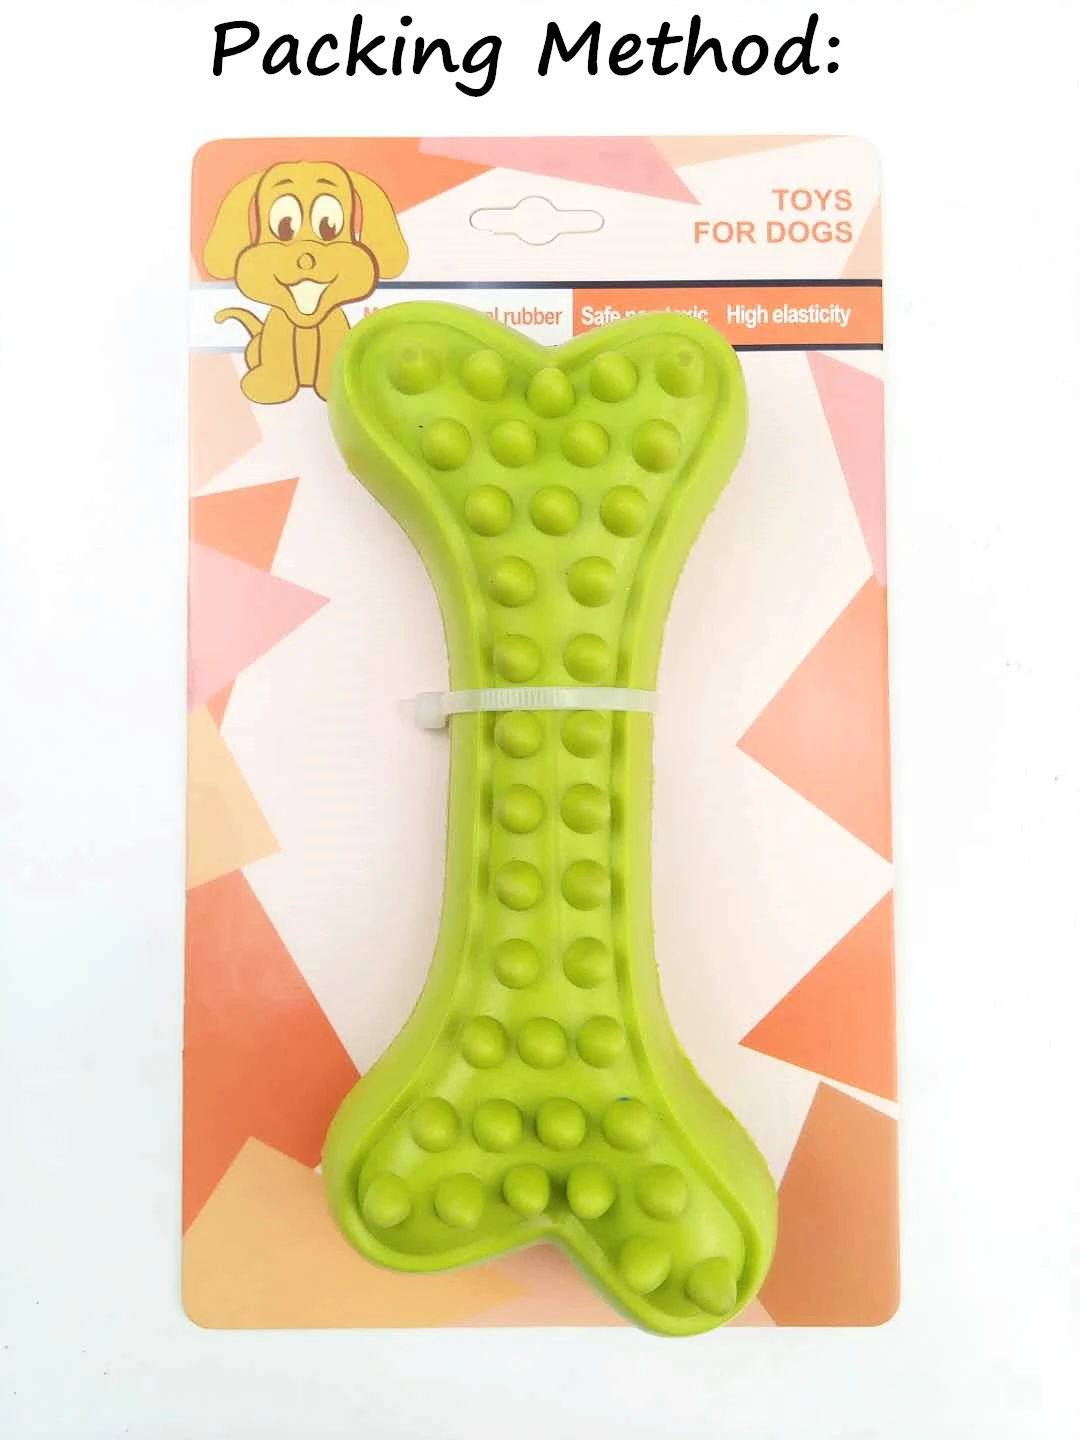 2020 Hot Sell Puppy Teething Toy Dog Chew Toothbrush Teeth Cleaning Toy Fetch Dental Chew Bone Indestructible Interactive Toy